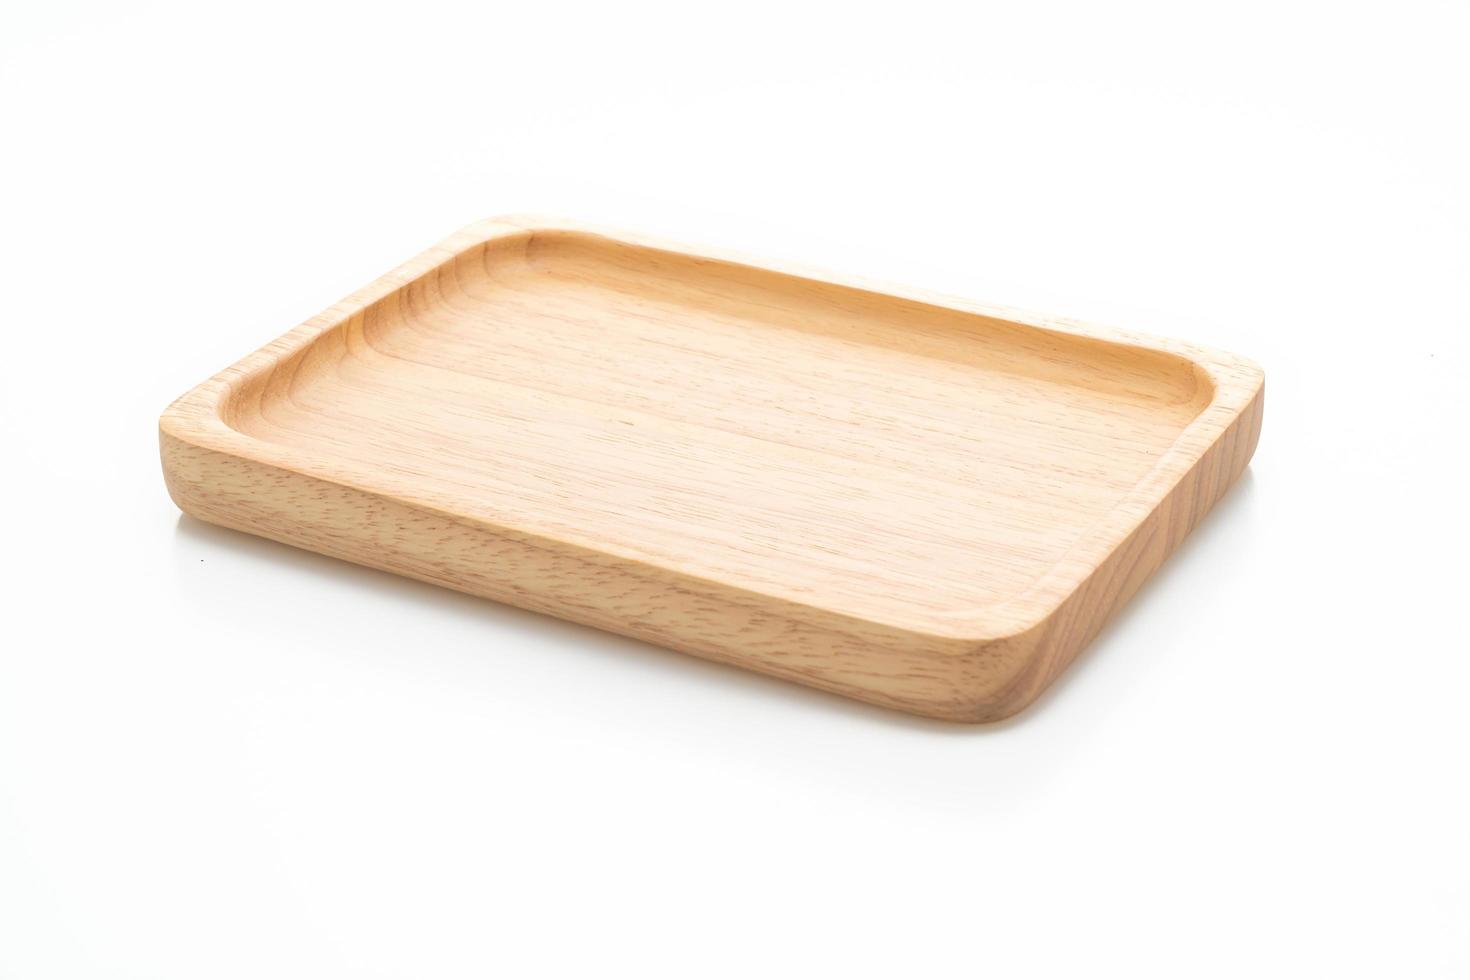 Wooden tray or plate isolated on white background photo